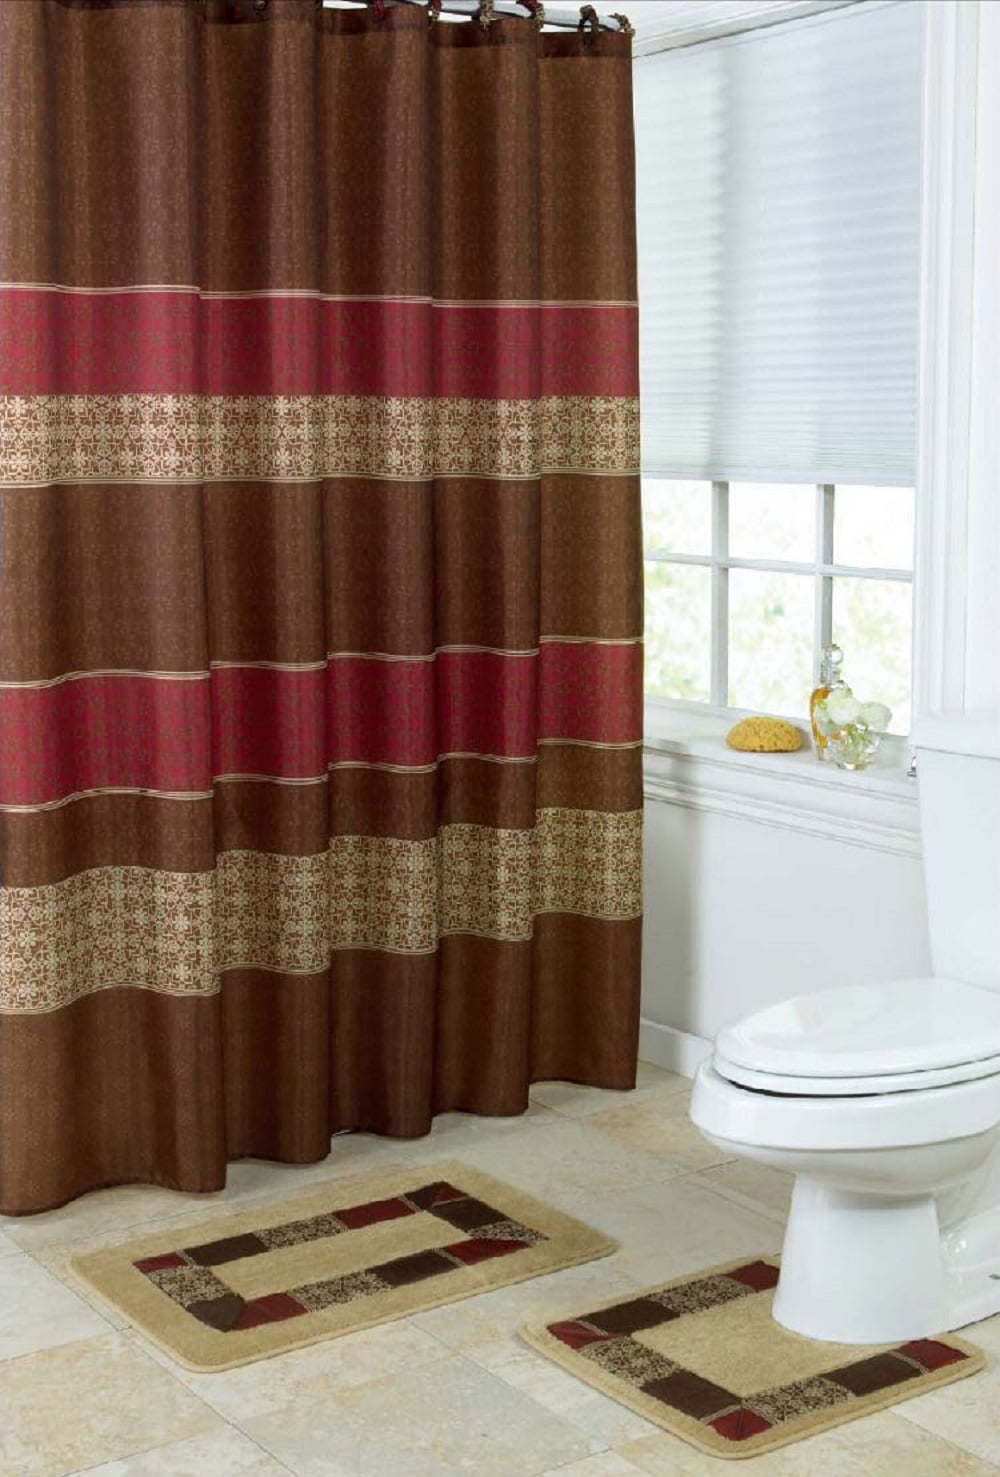 Details about   Safari Decorative Shower Curtain Brown/Taupe 